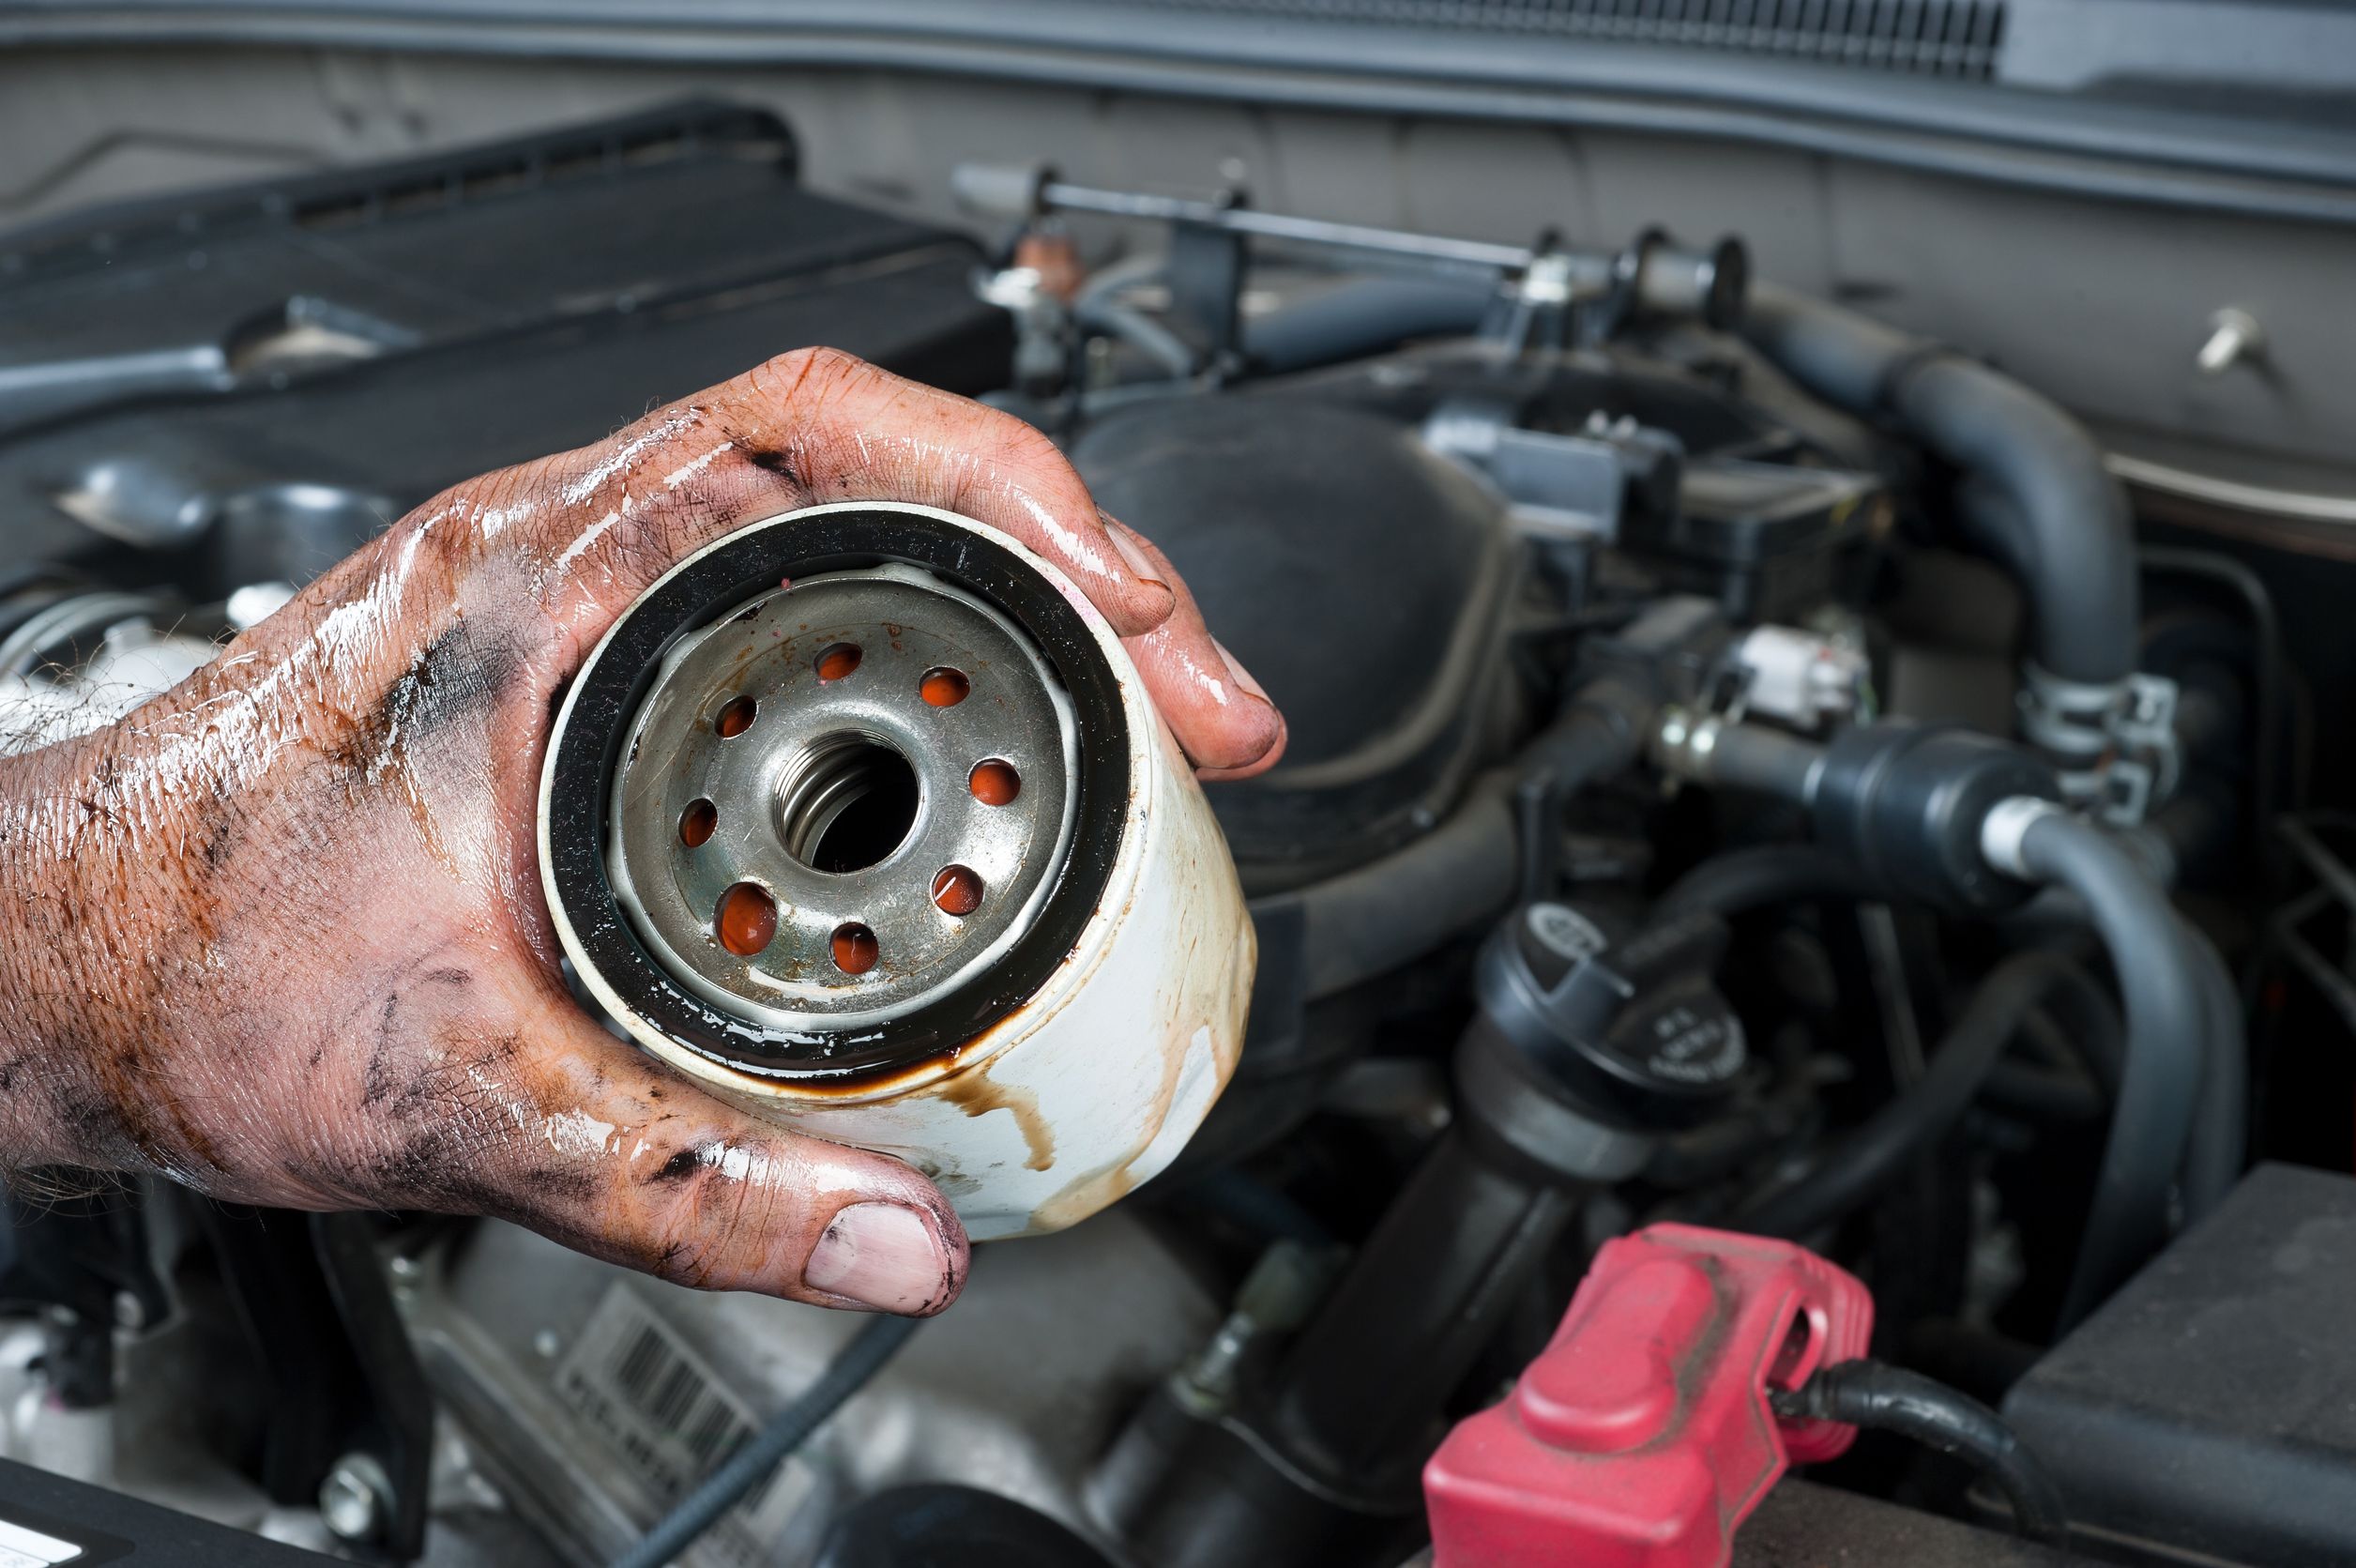 How to Change the Oil in Your Car | Digital Trends